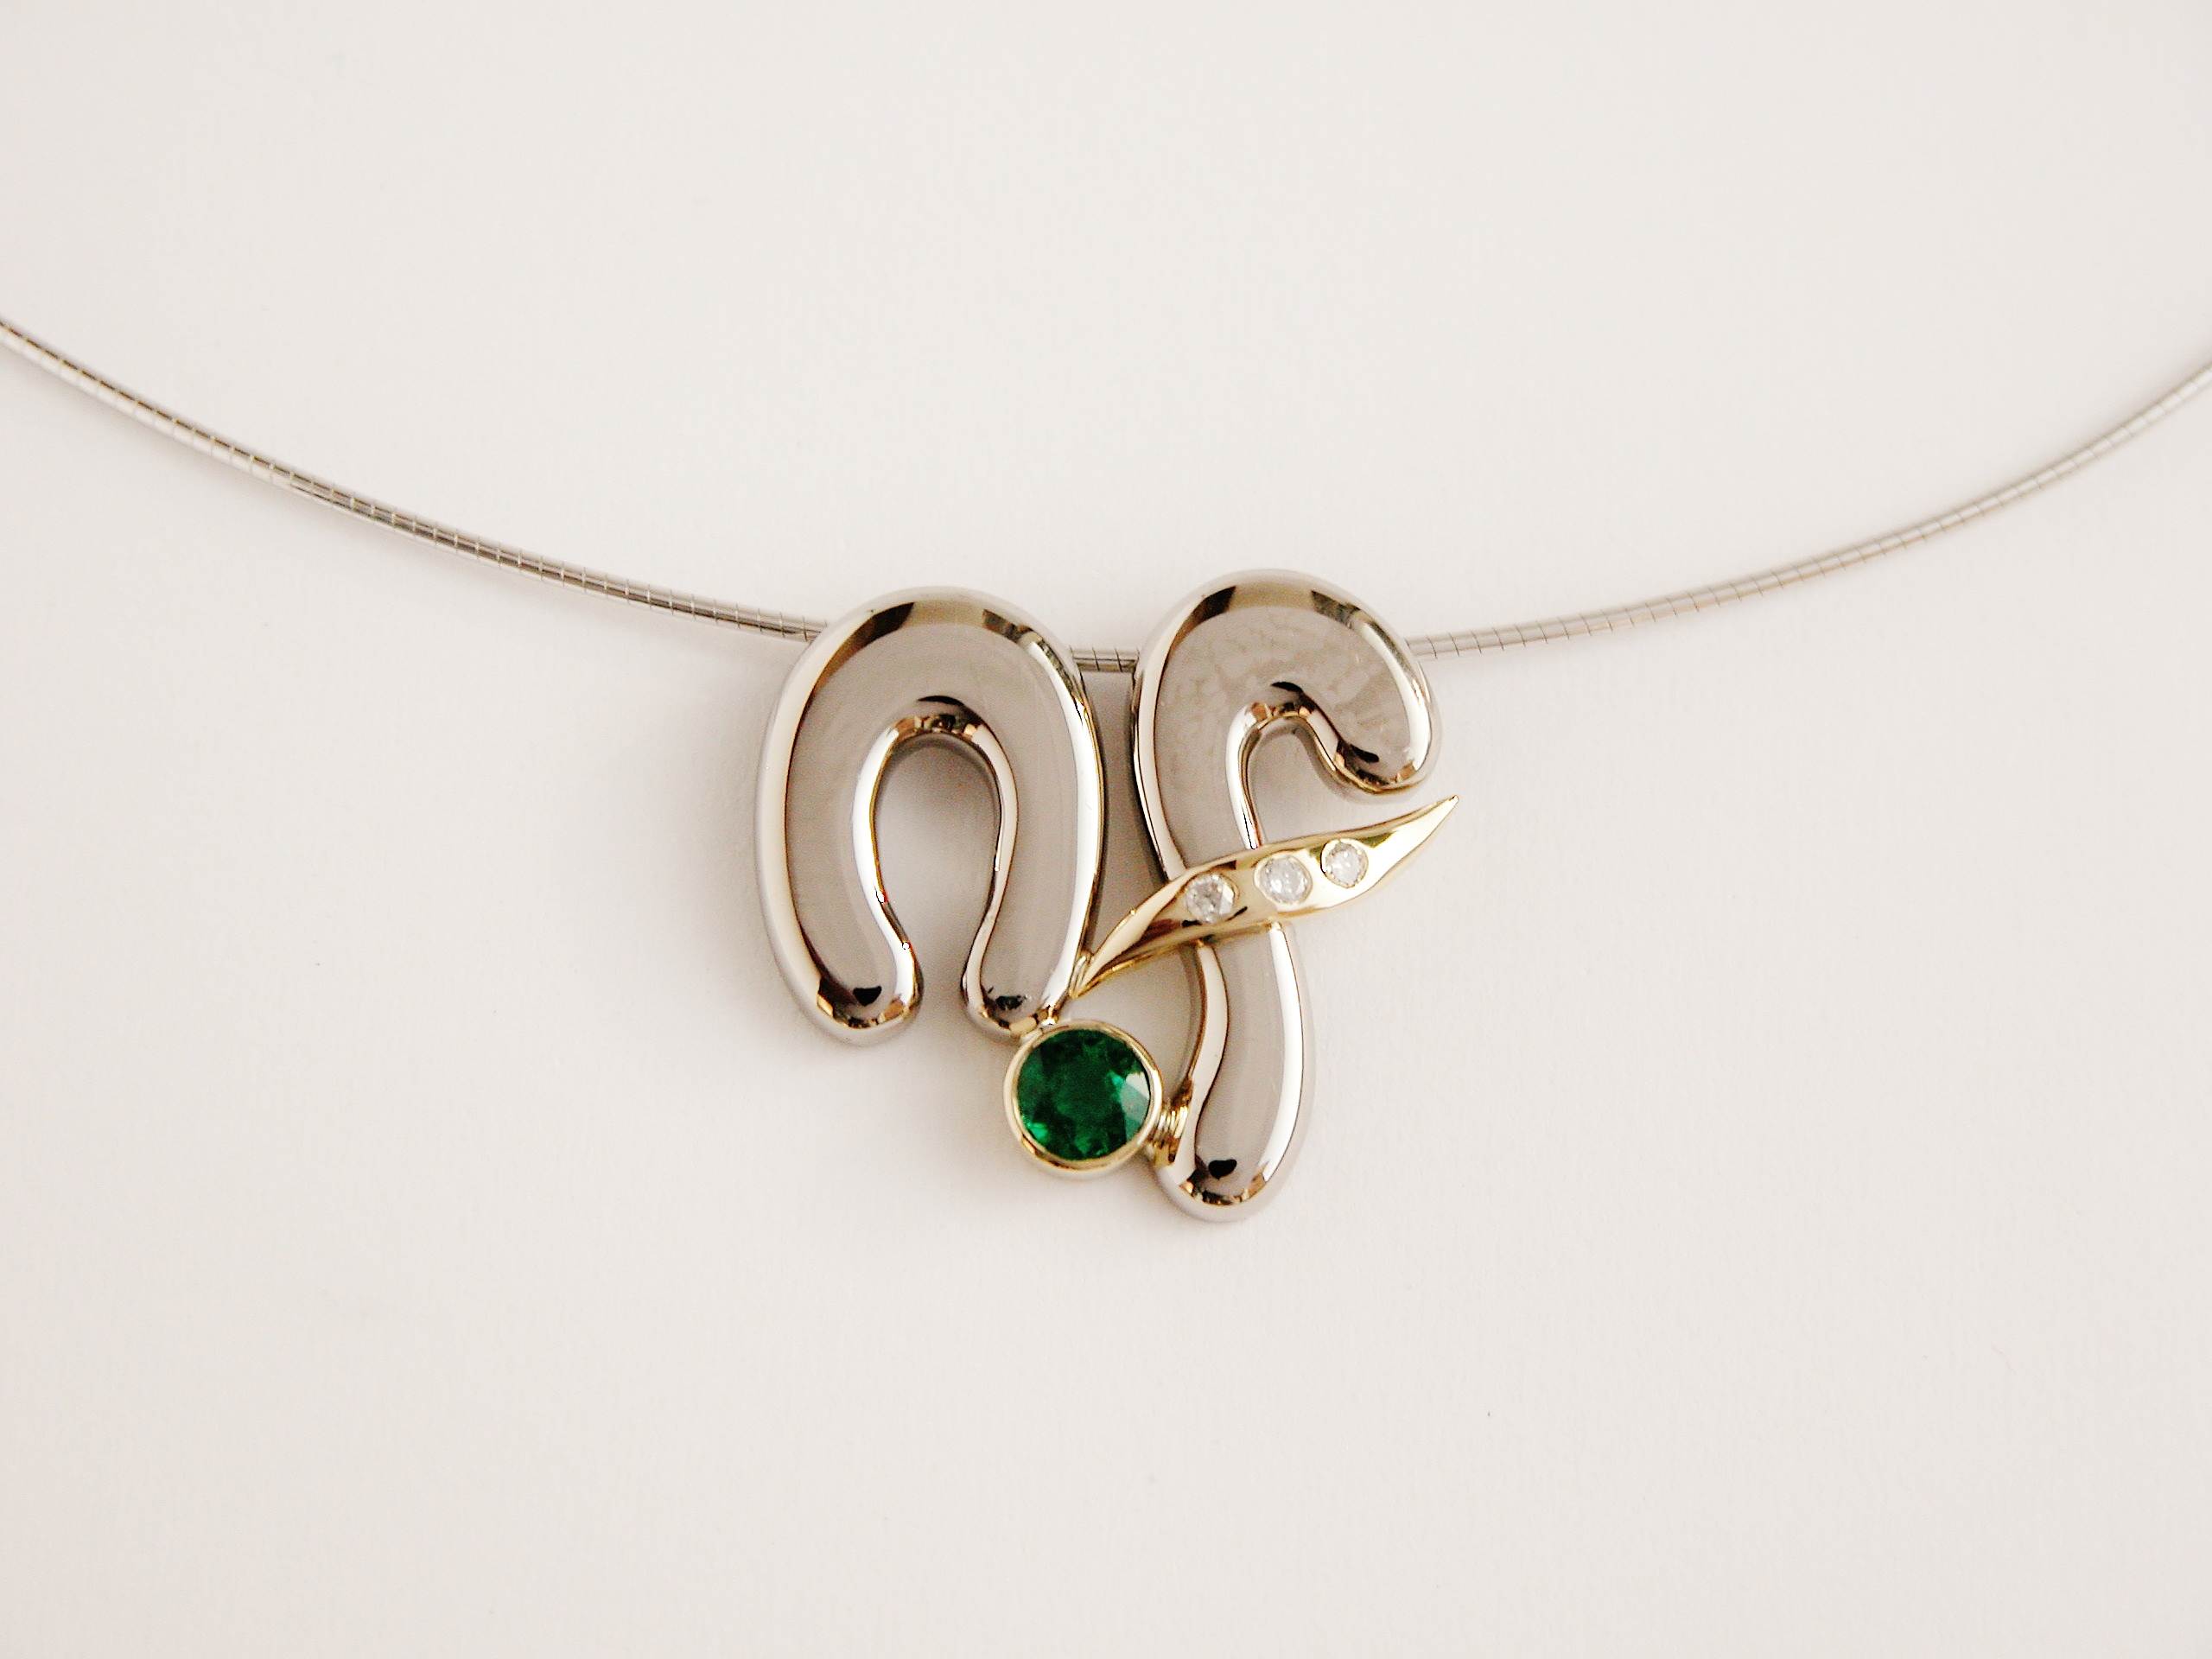 Round emeralds rub-over set in initial style 18ct. white & yellow gold pendant with small round brilliant cut diamonds flush set in the 18ct. yellow gold.